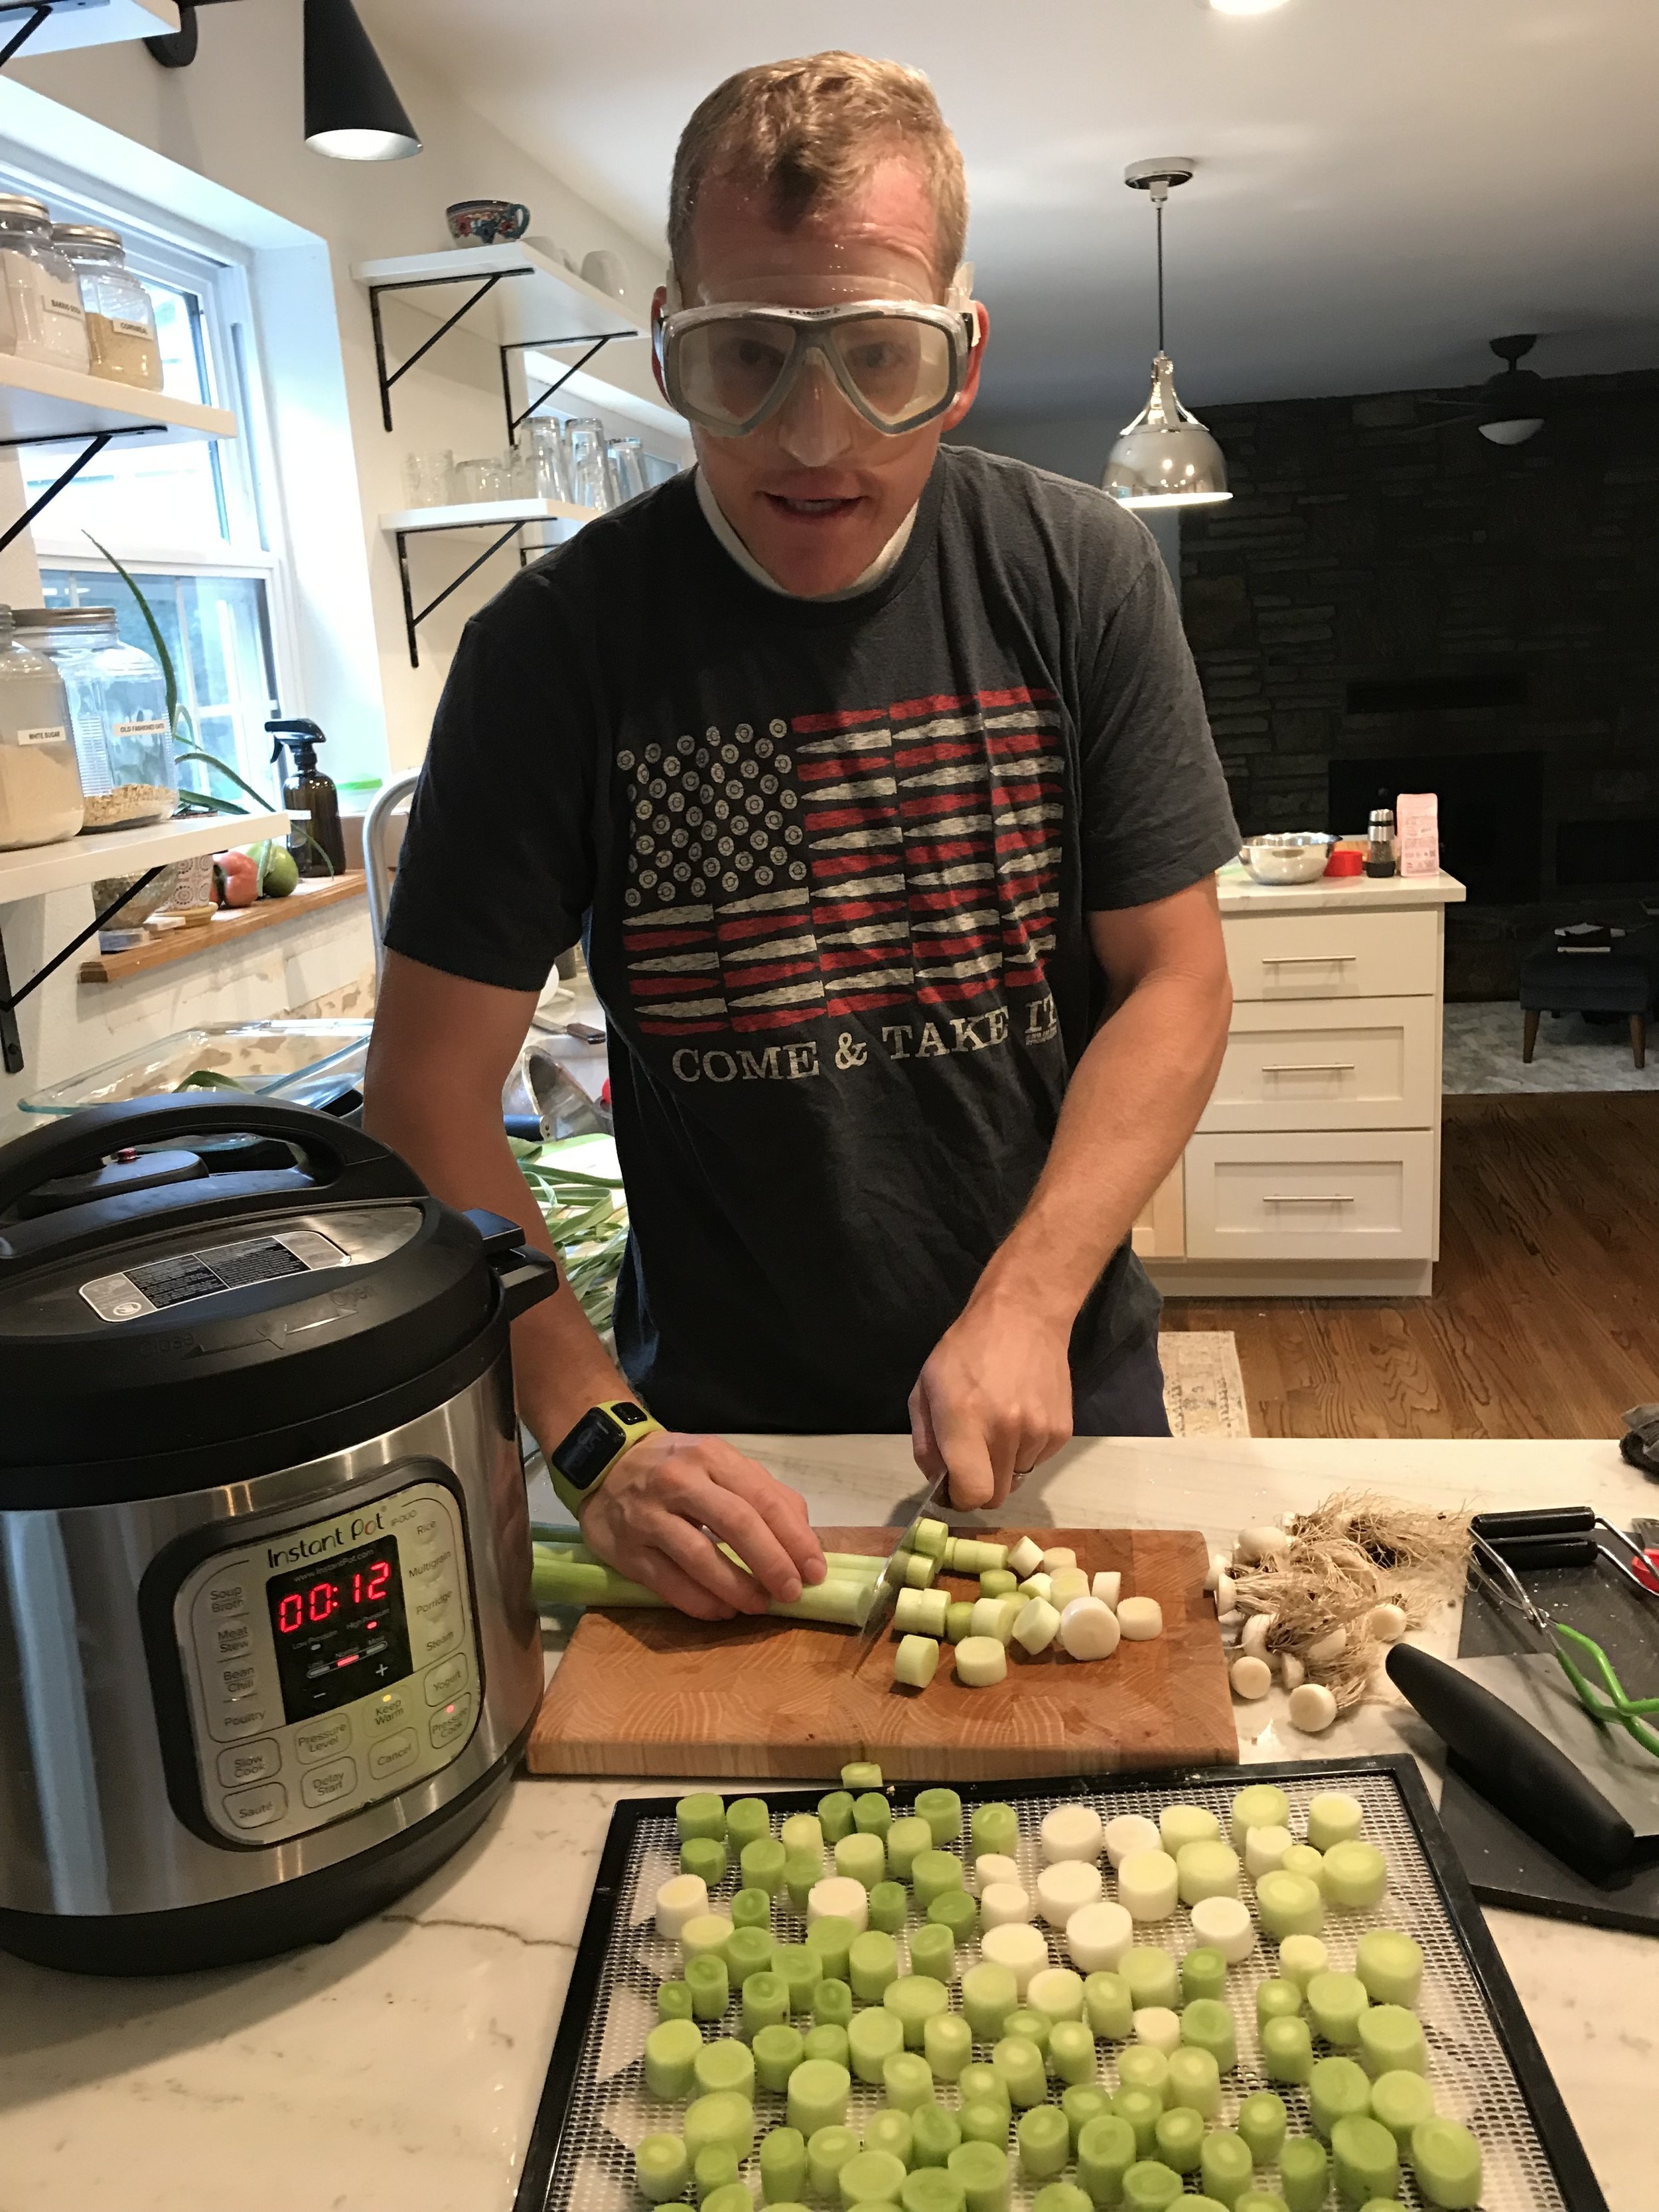  I hope Cameron doesn’t see this picture- he might want me to take it off the blog! Haha! He was helping cut leeks for the dehydrator and man they sting your eyes so much when they are fresh. Swim goggles do the trick to keep the tears at bay! 